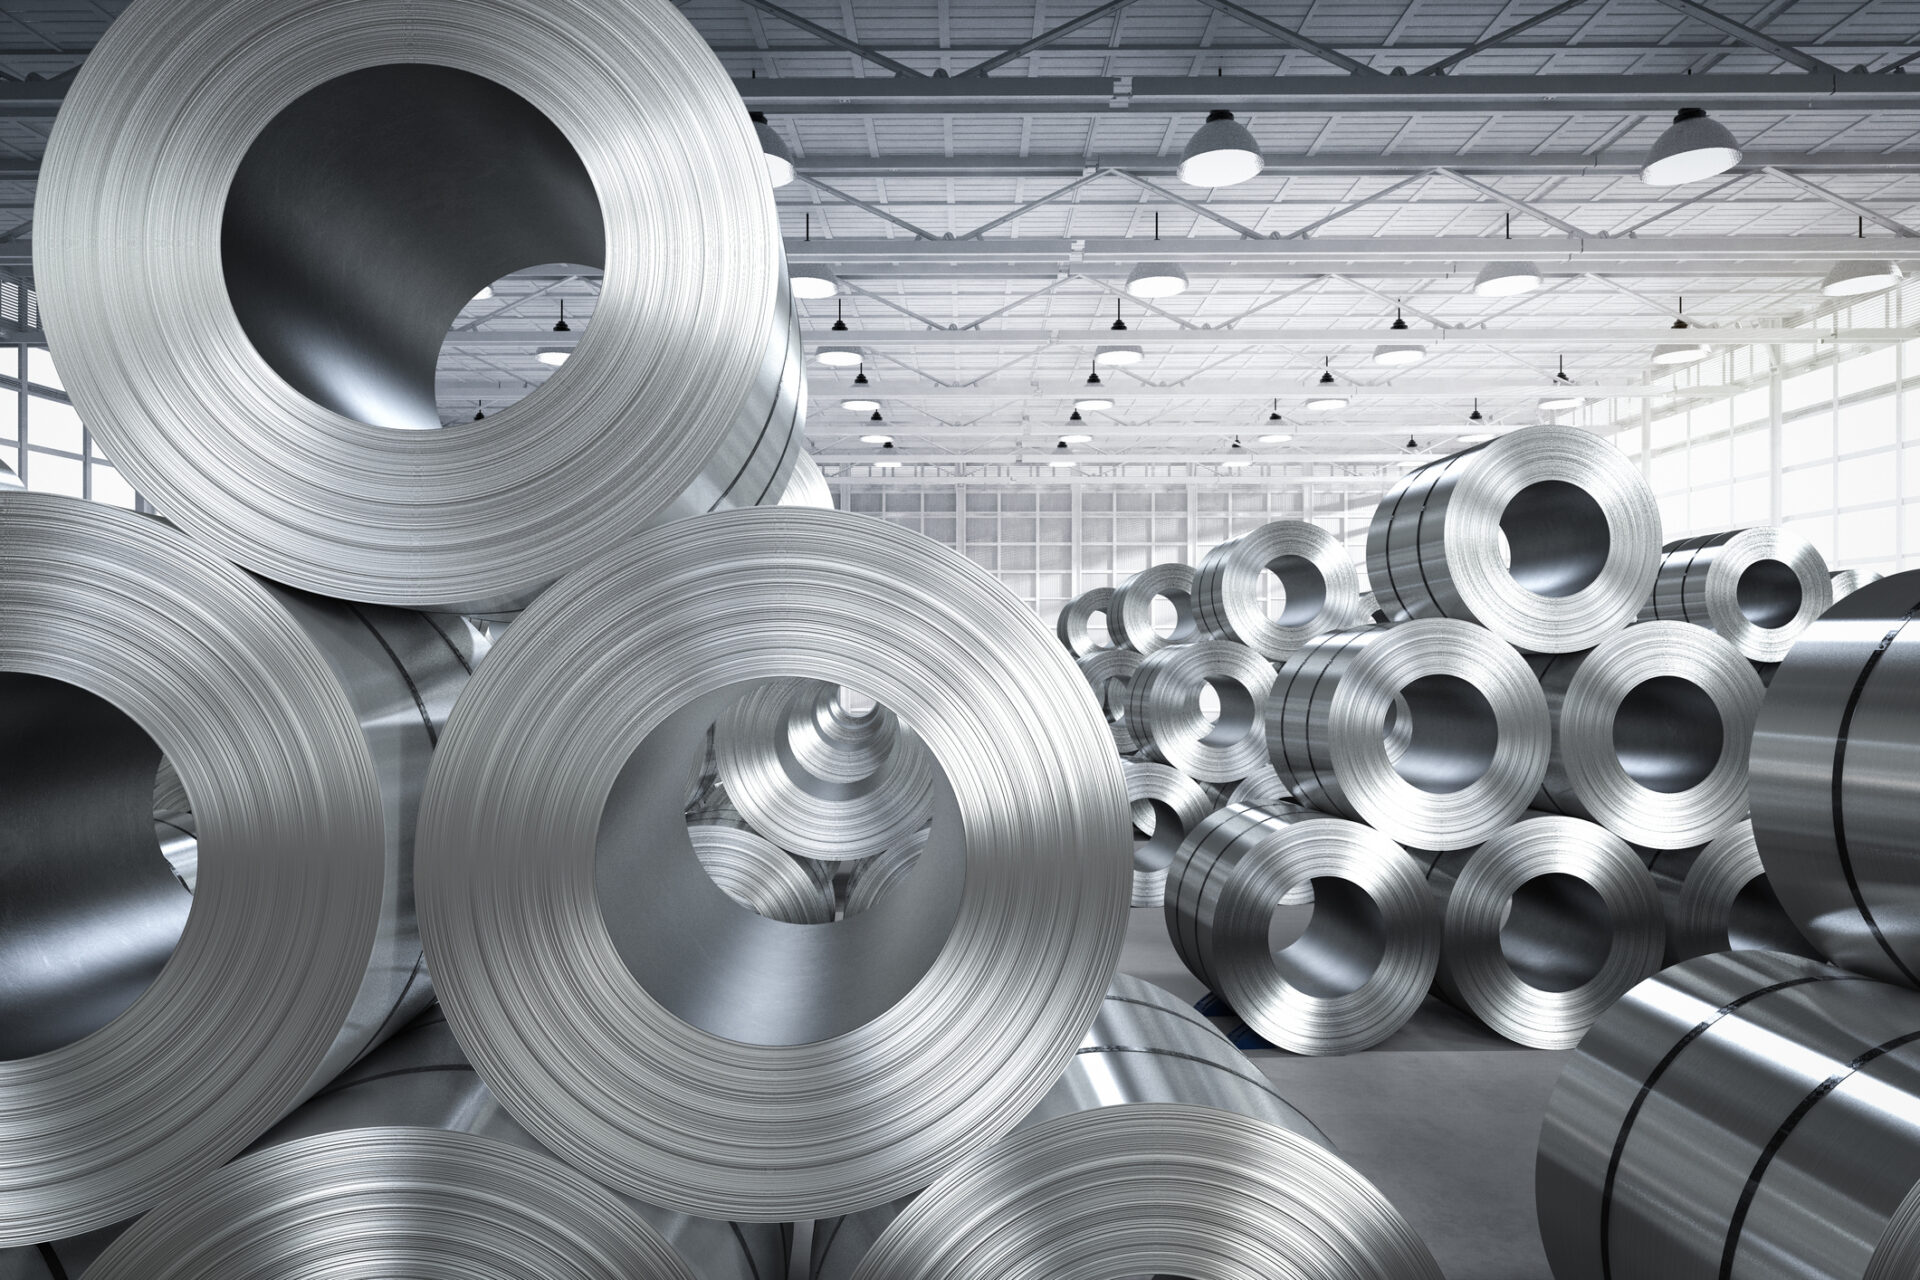 aluminum coil stock in a warehouse